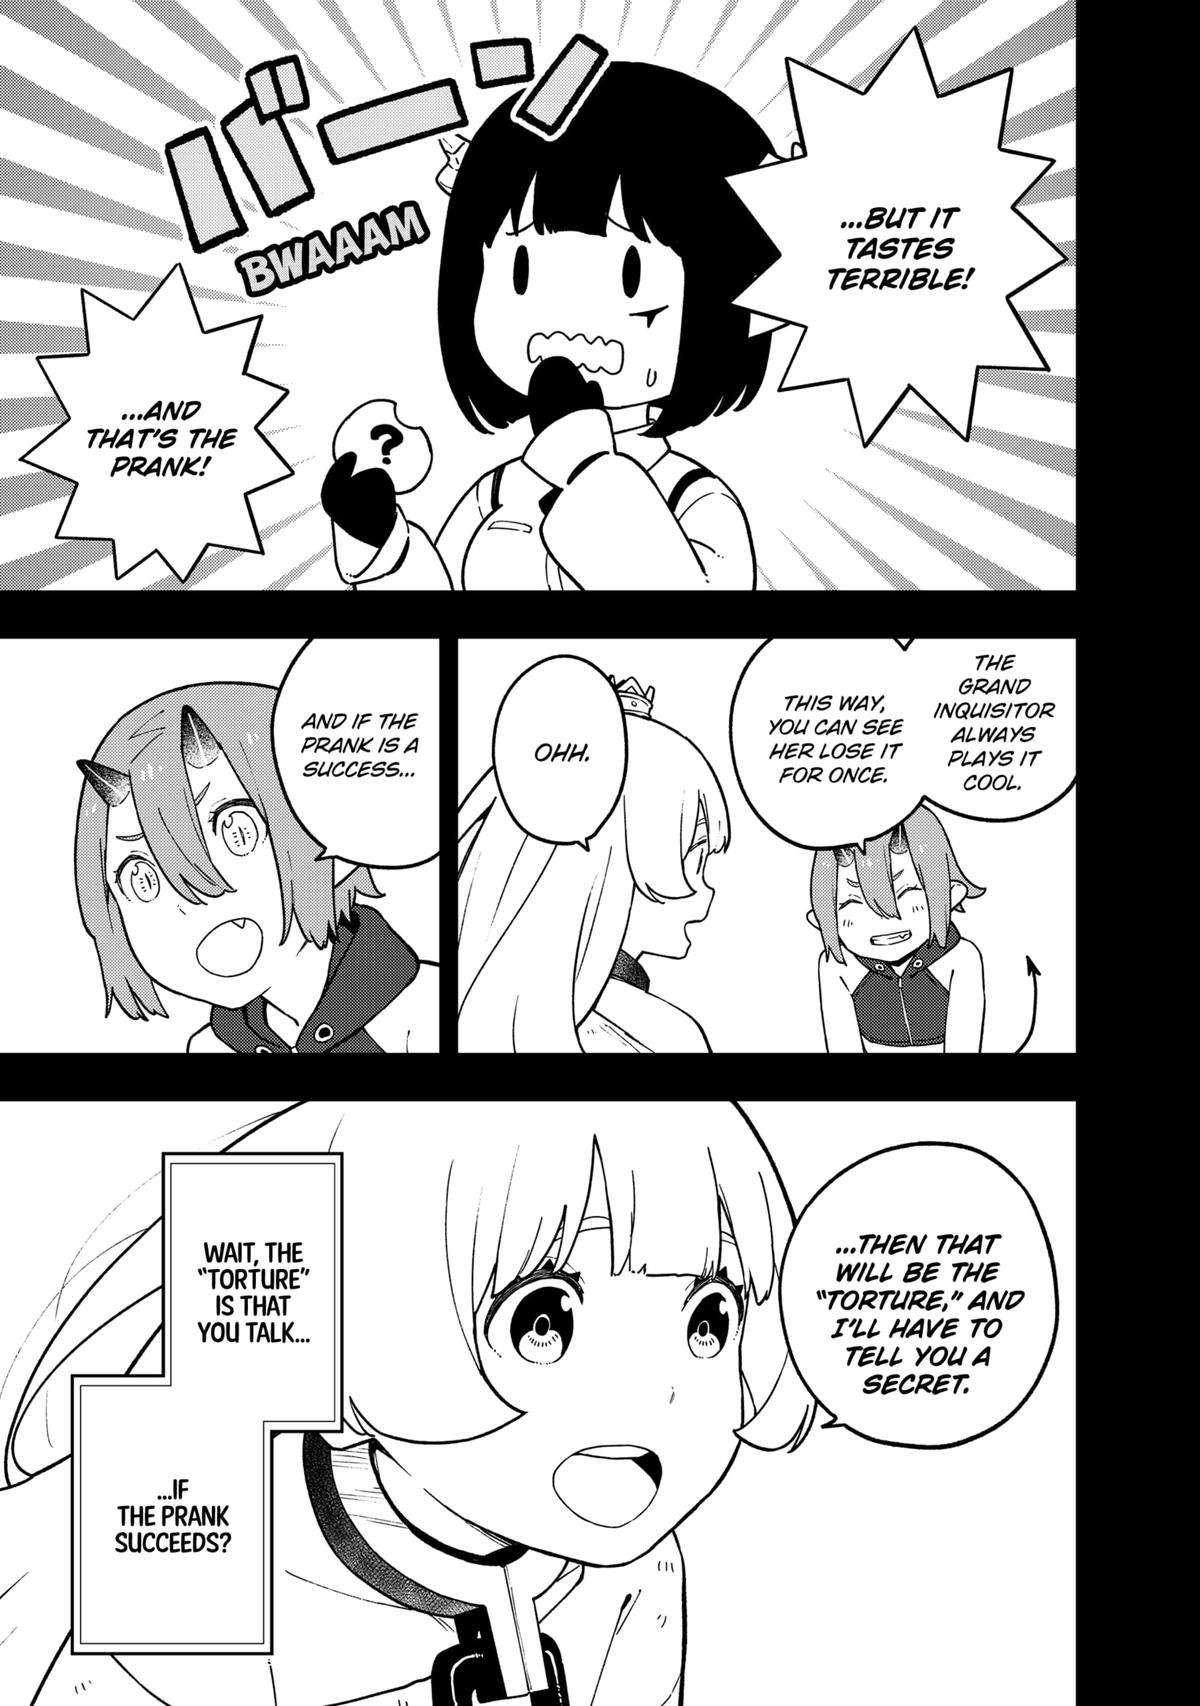 It's Time for "Interrogation", Princess! - chapter 215 - #3